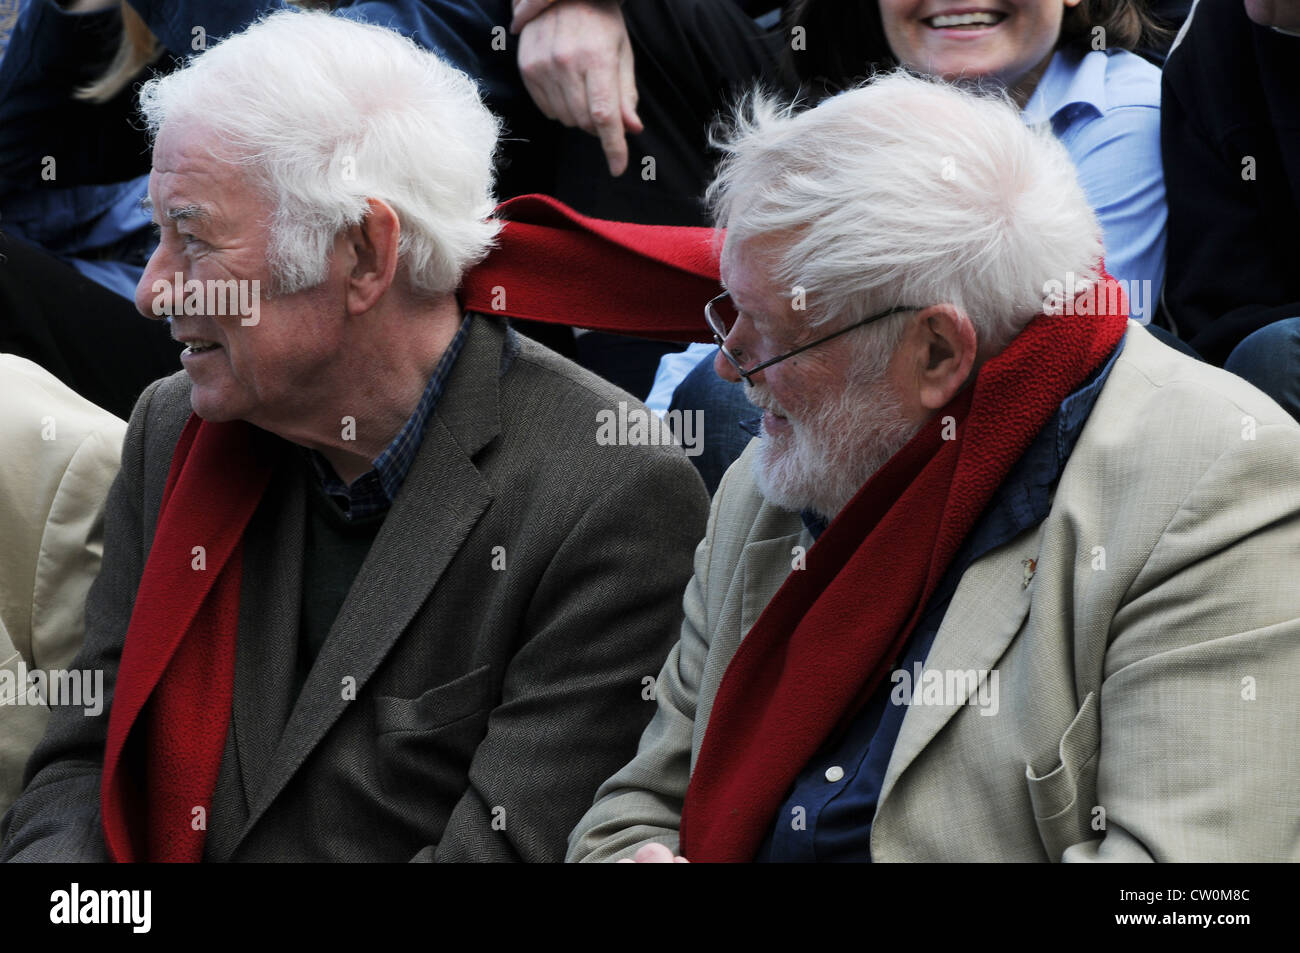 The ties that bind, Seamus Heaney & Michael Longley share a red scarf while listening to a reading on the Hill of Tara, Ireland Stock Photo